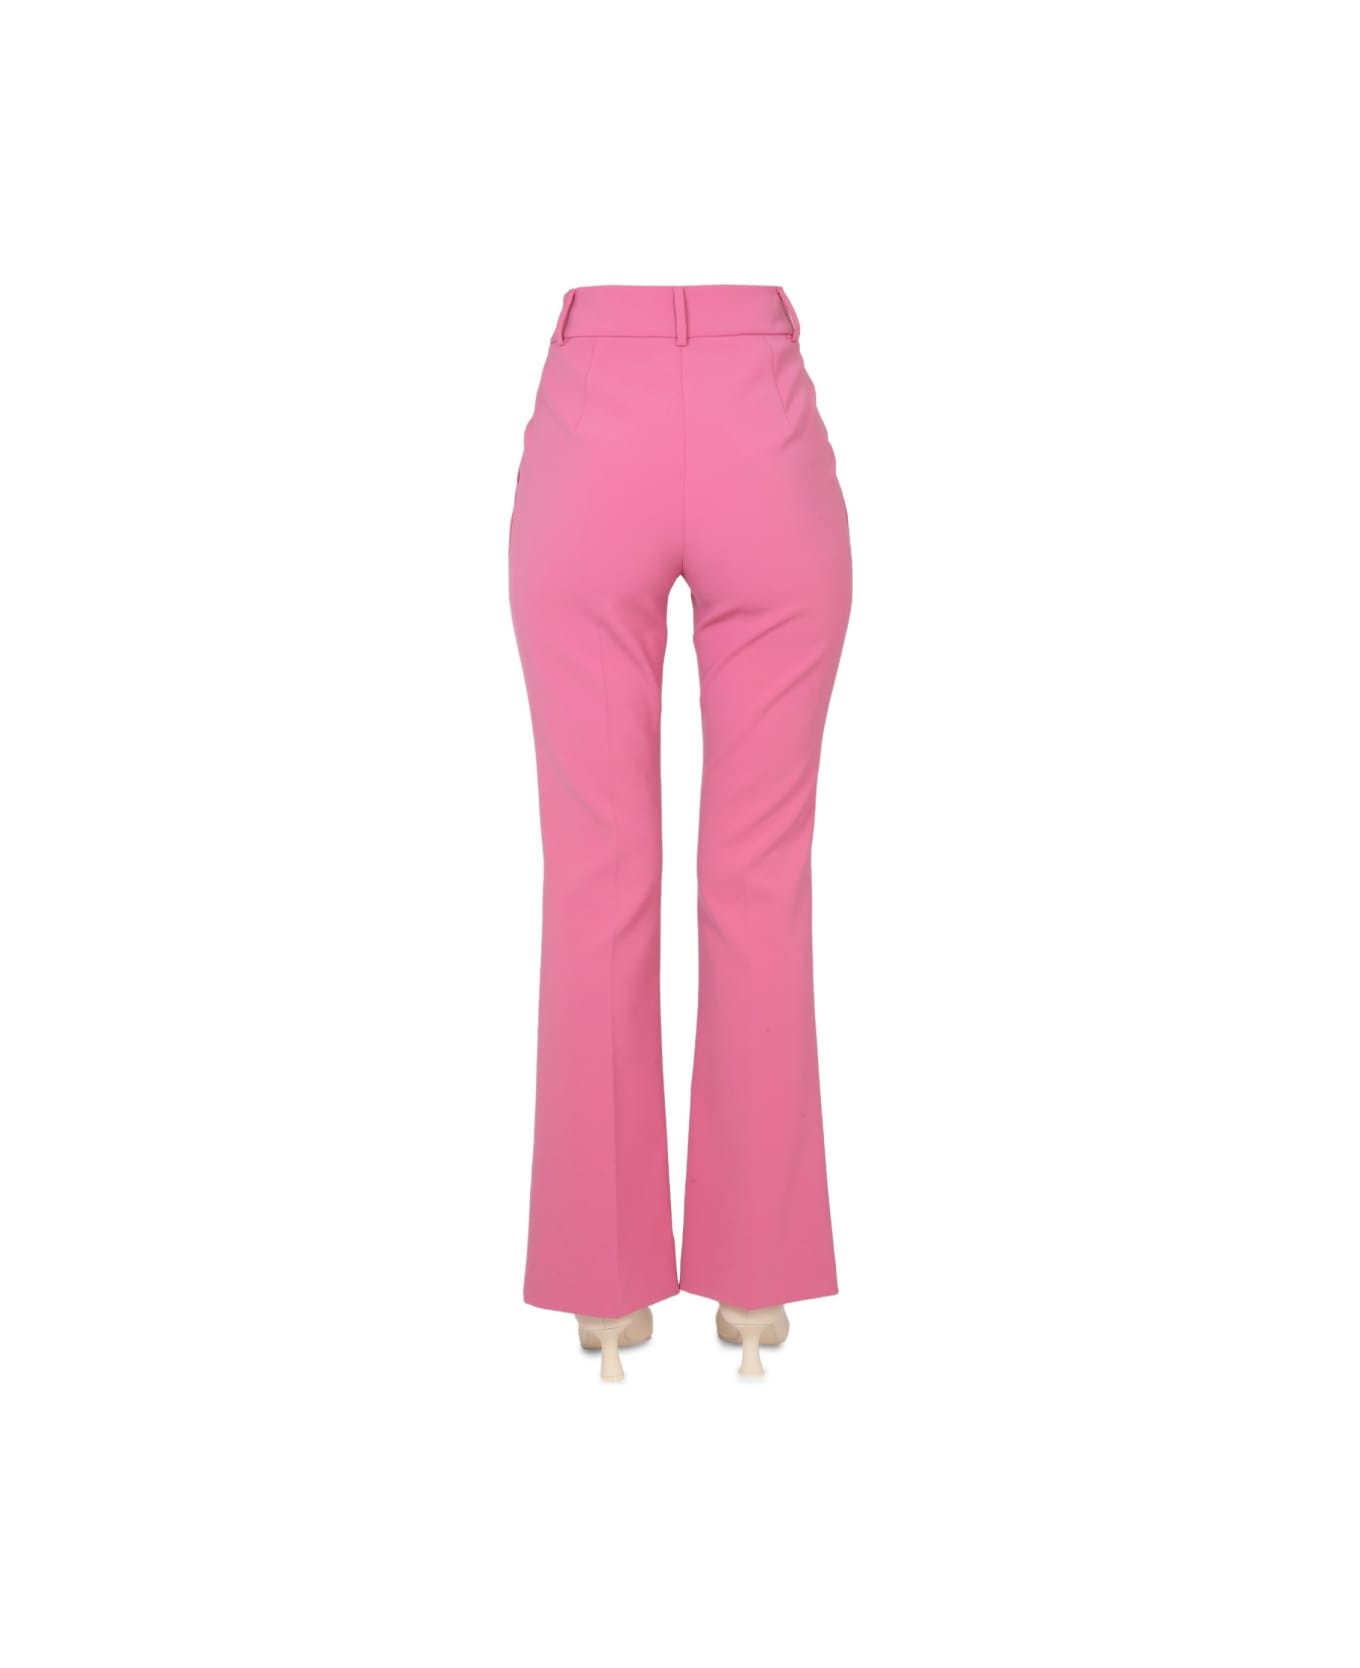 Boutique Moschino Cady Pants - PINK